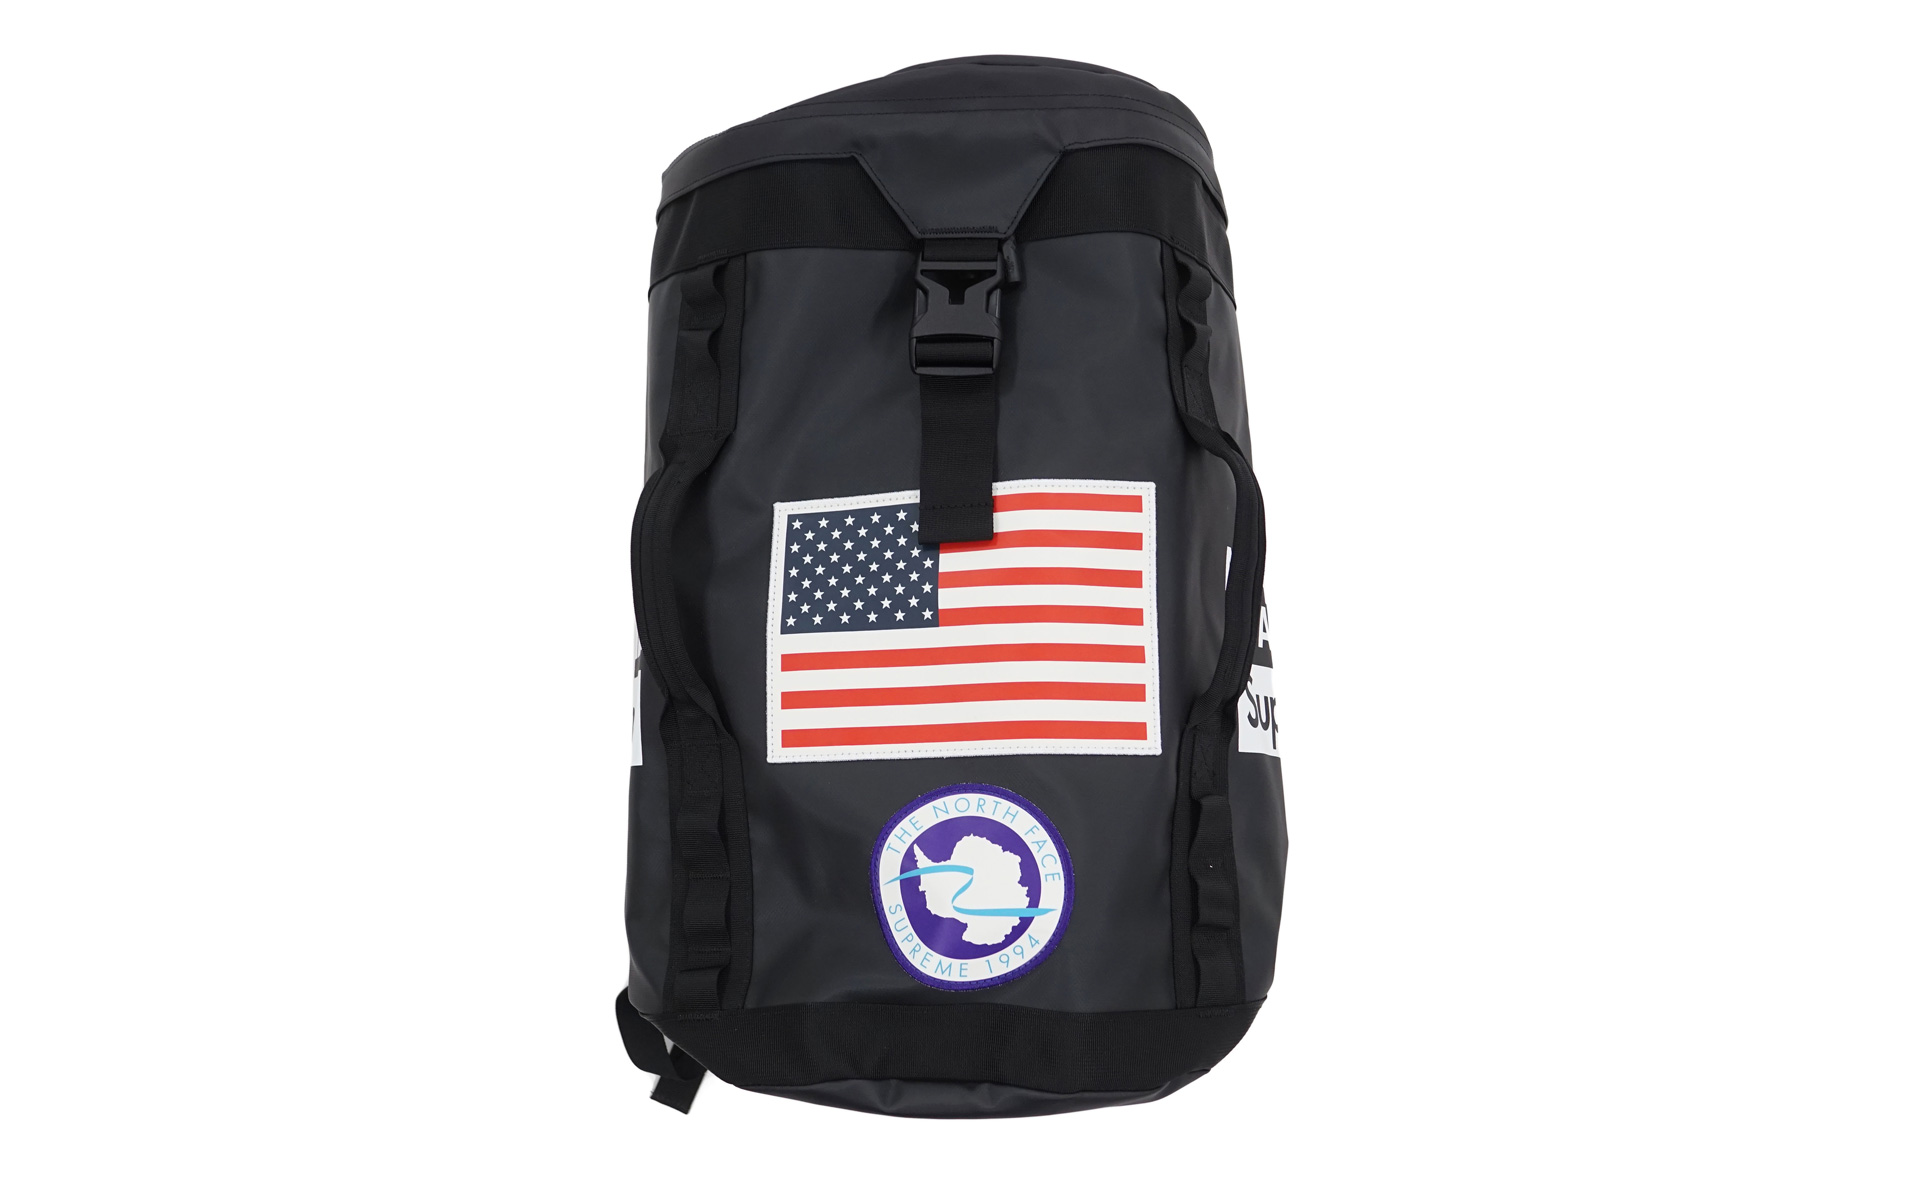 Supreme The North Face Trans Antarctica Expedition Big Haul Backpack Black